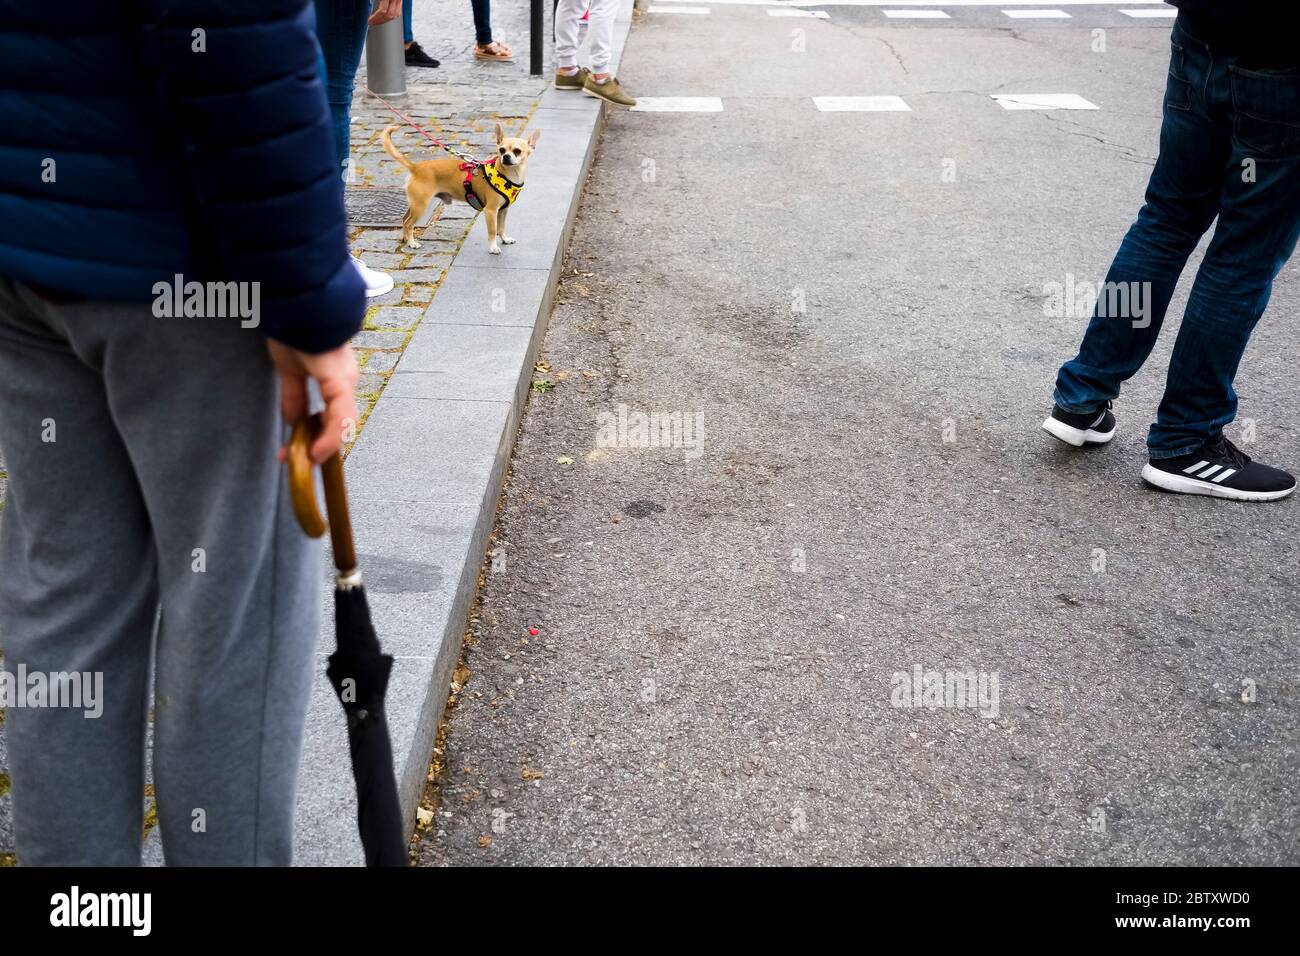 A view of a small dog waiting with other people to cross the road at the traffic lights. Stock Photo